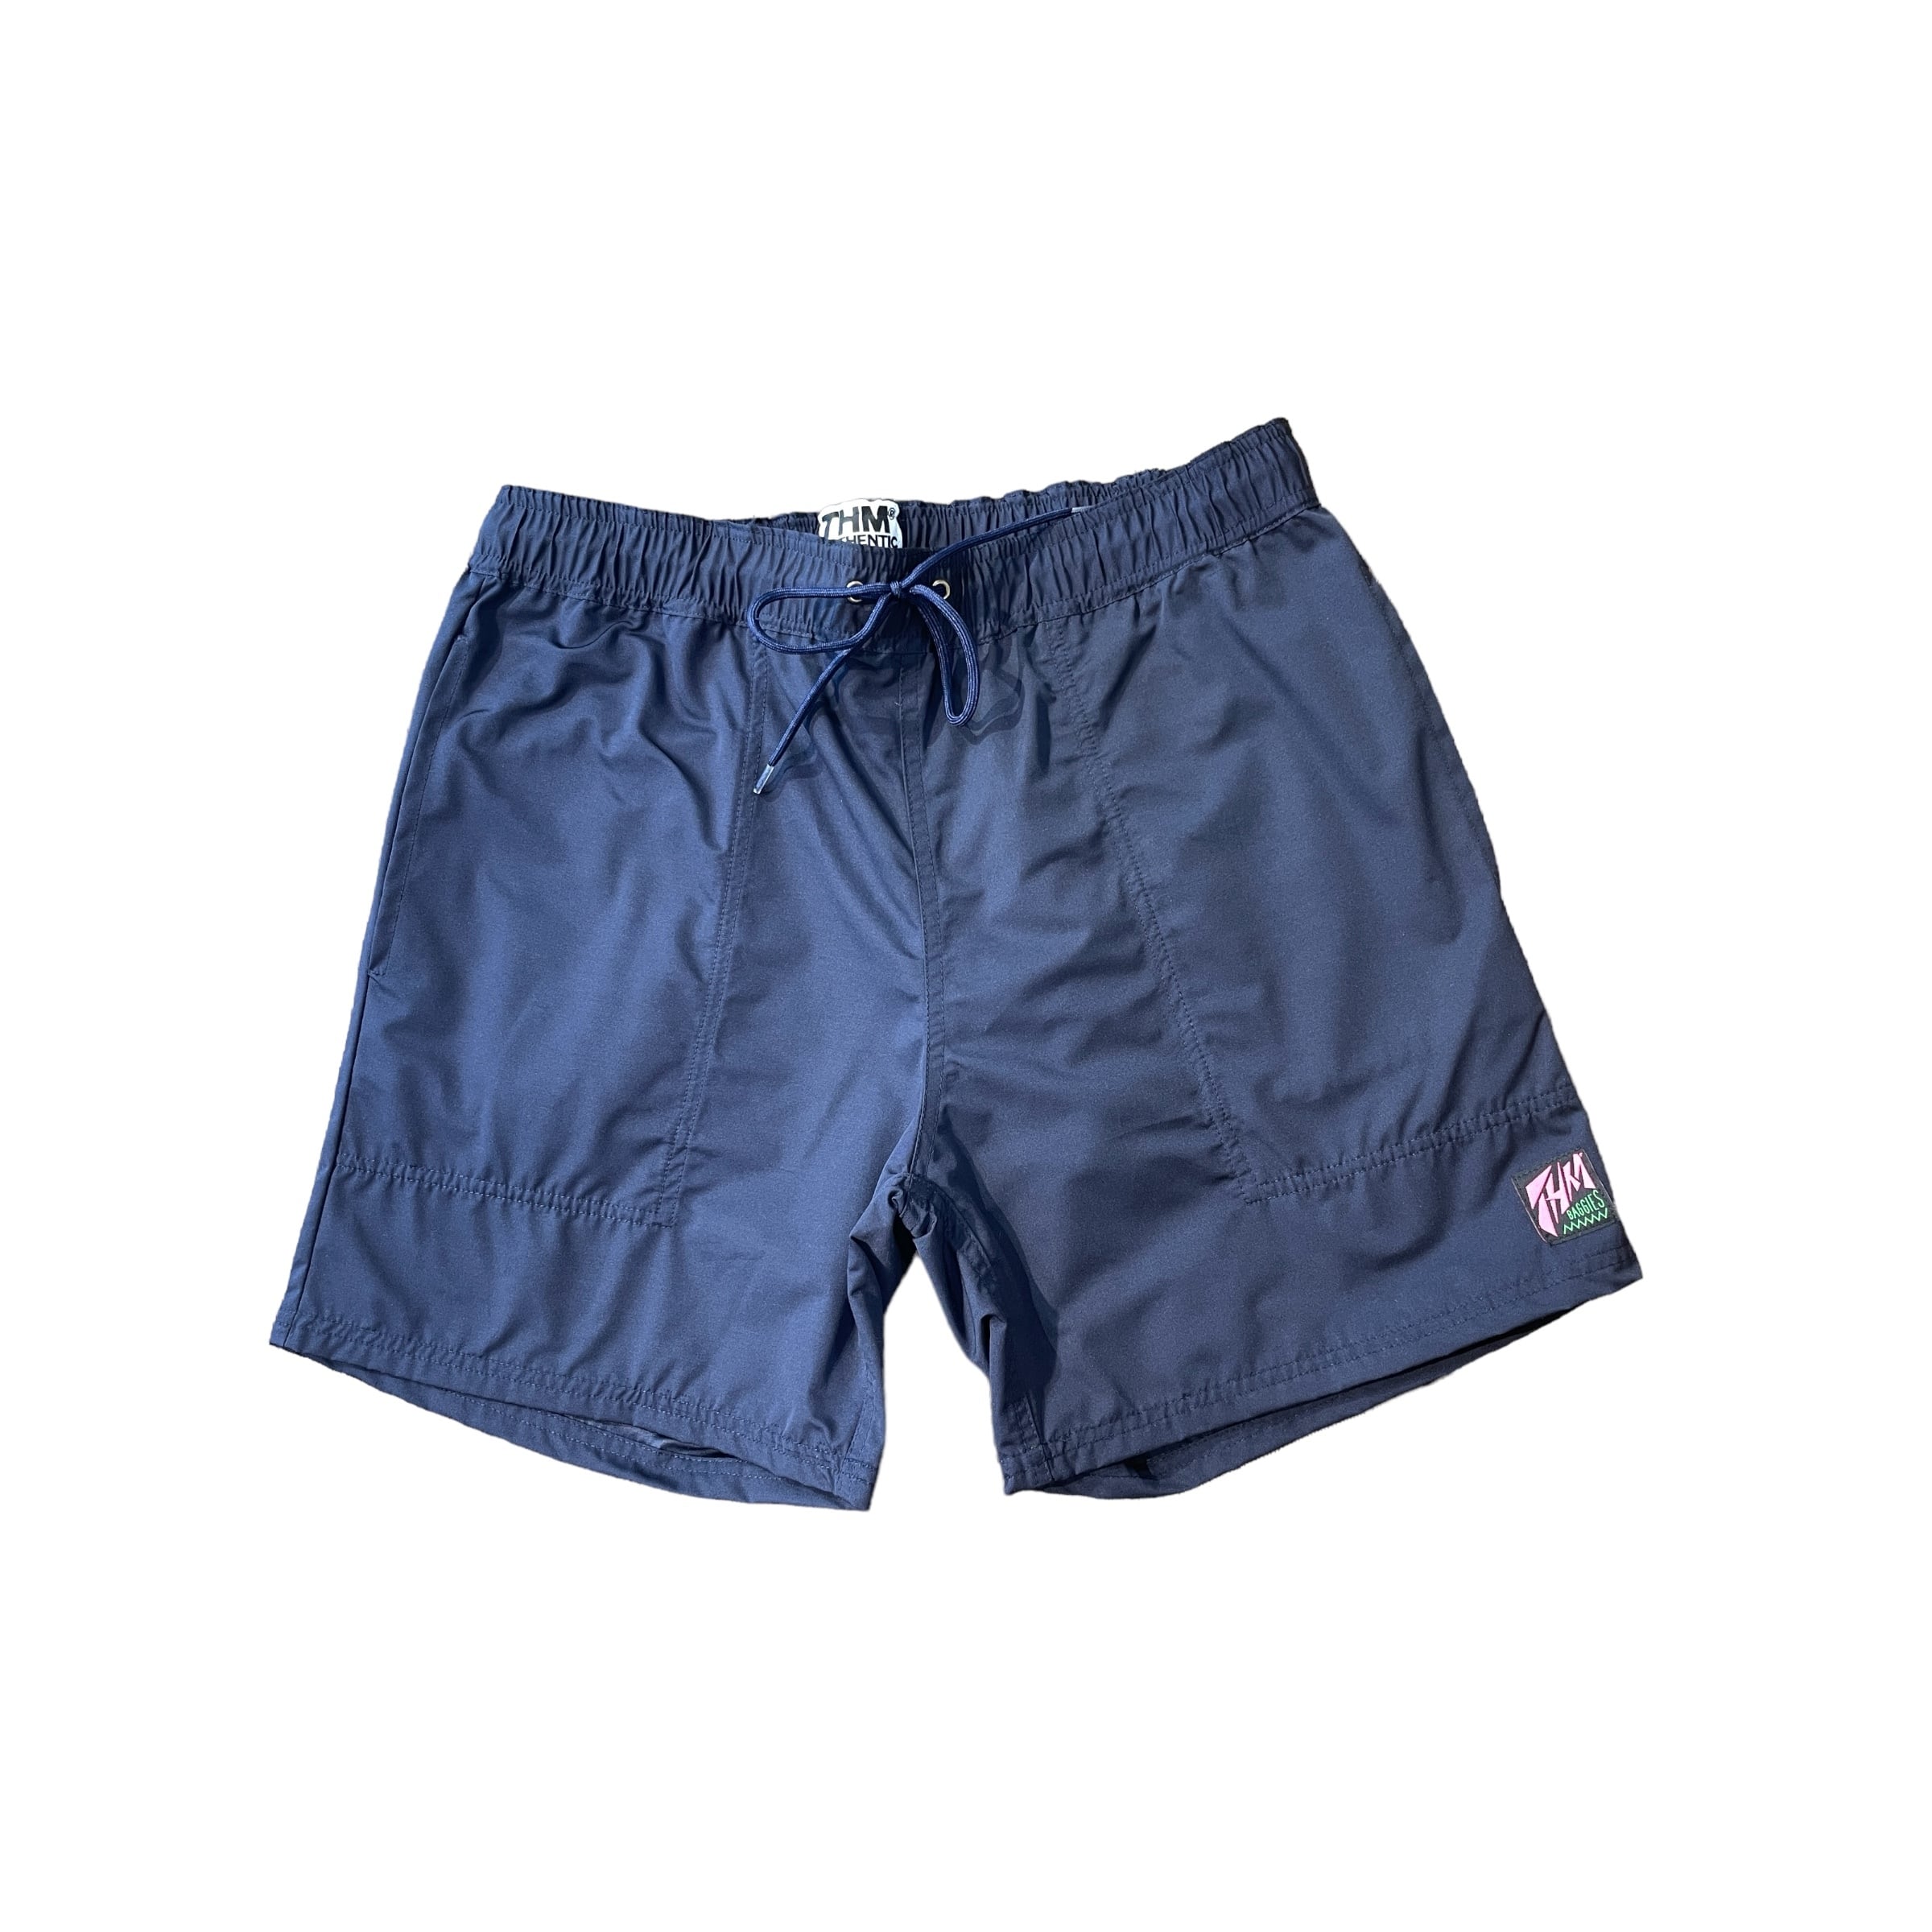 SHORTS | THE SUNS ONLINE STORE